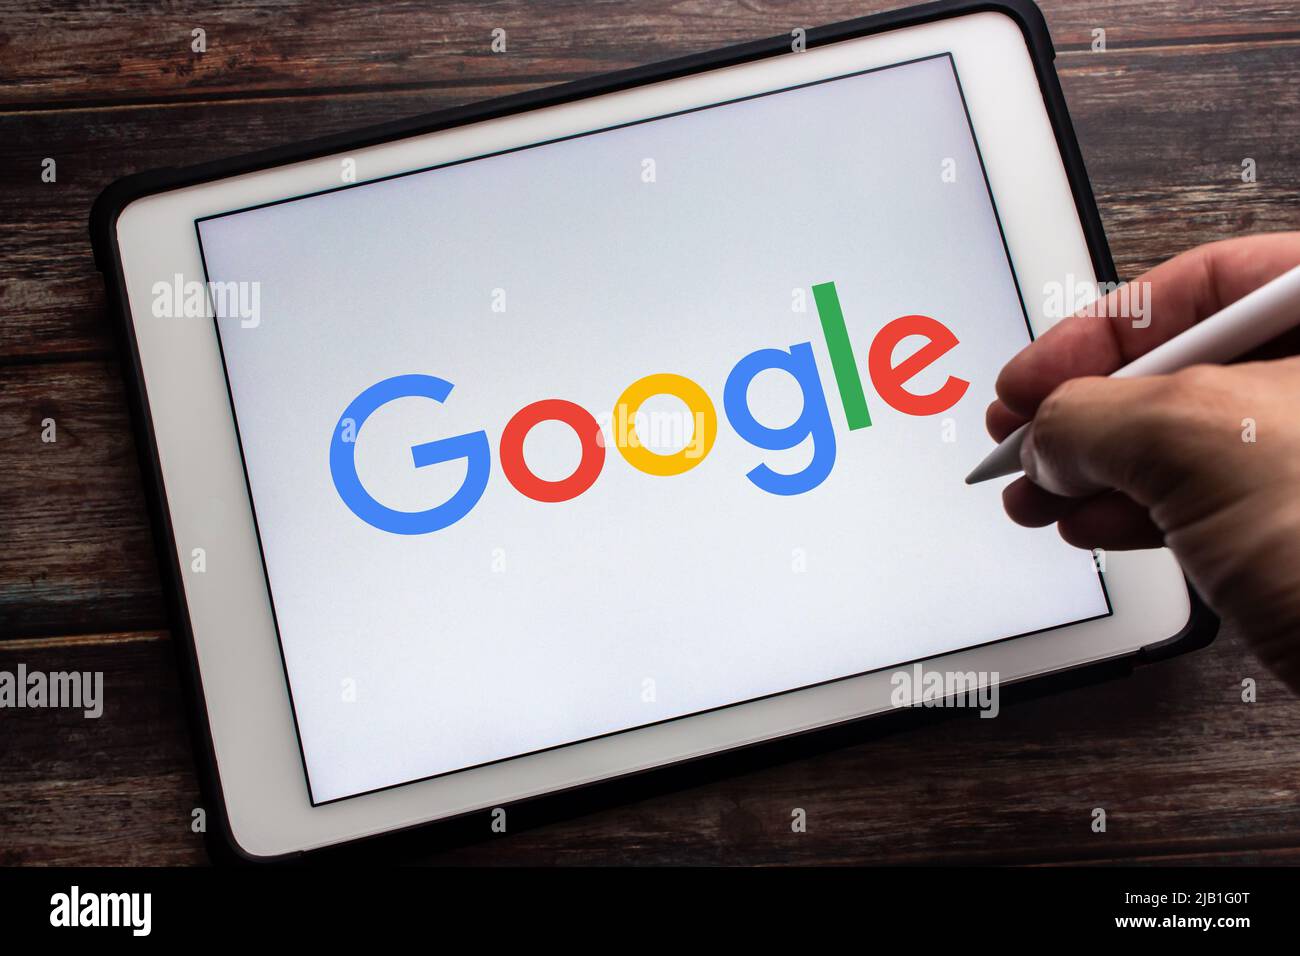 Closeup logo of Google on tablet. Man hand holding stylus pen. Google is US multinational company that specializes in Internet-related services Stock Photo